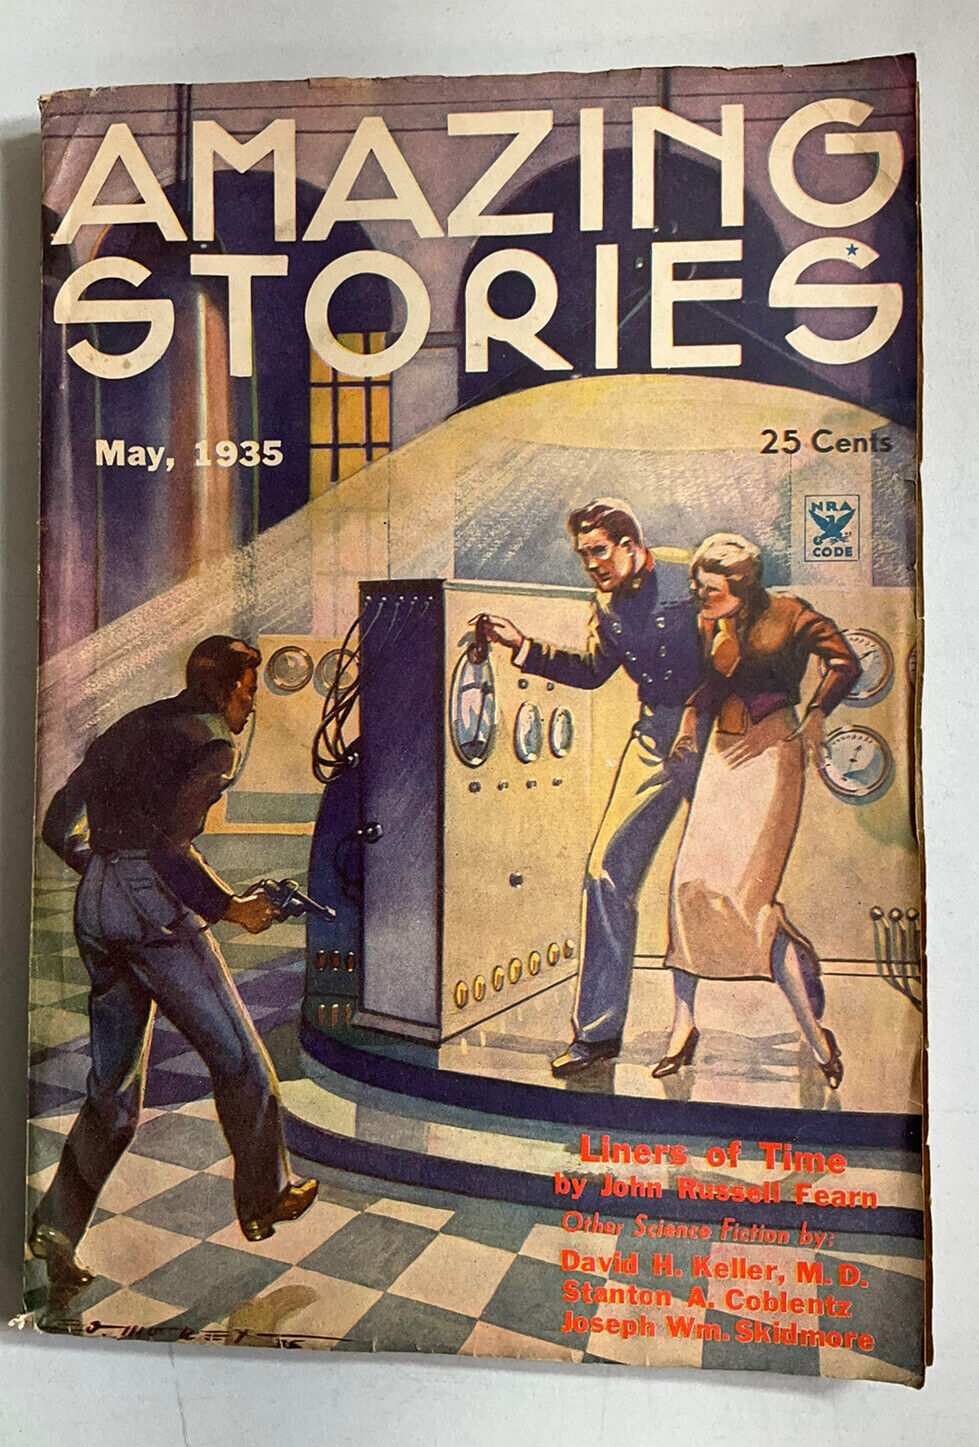 Amazing Stories May 1935 John Russell Fearn, Stanton A. Coblentz, Morey Cover